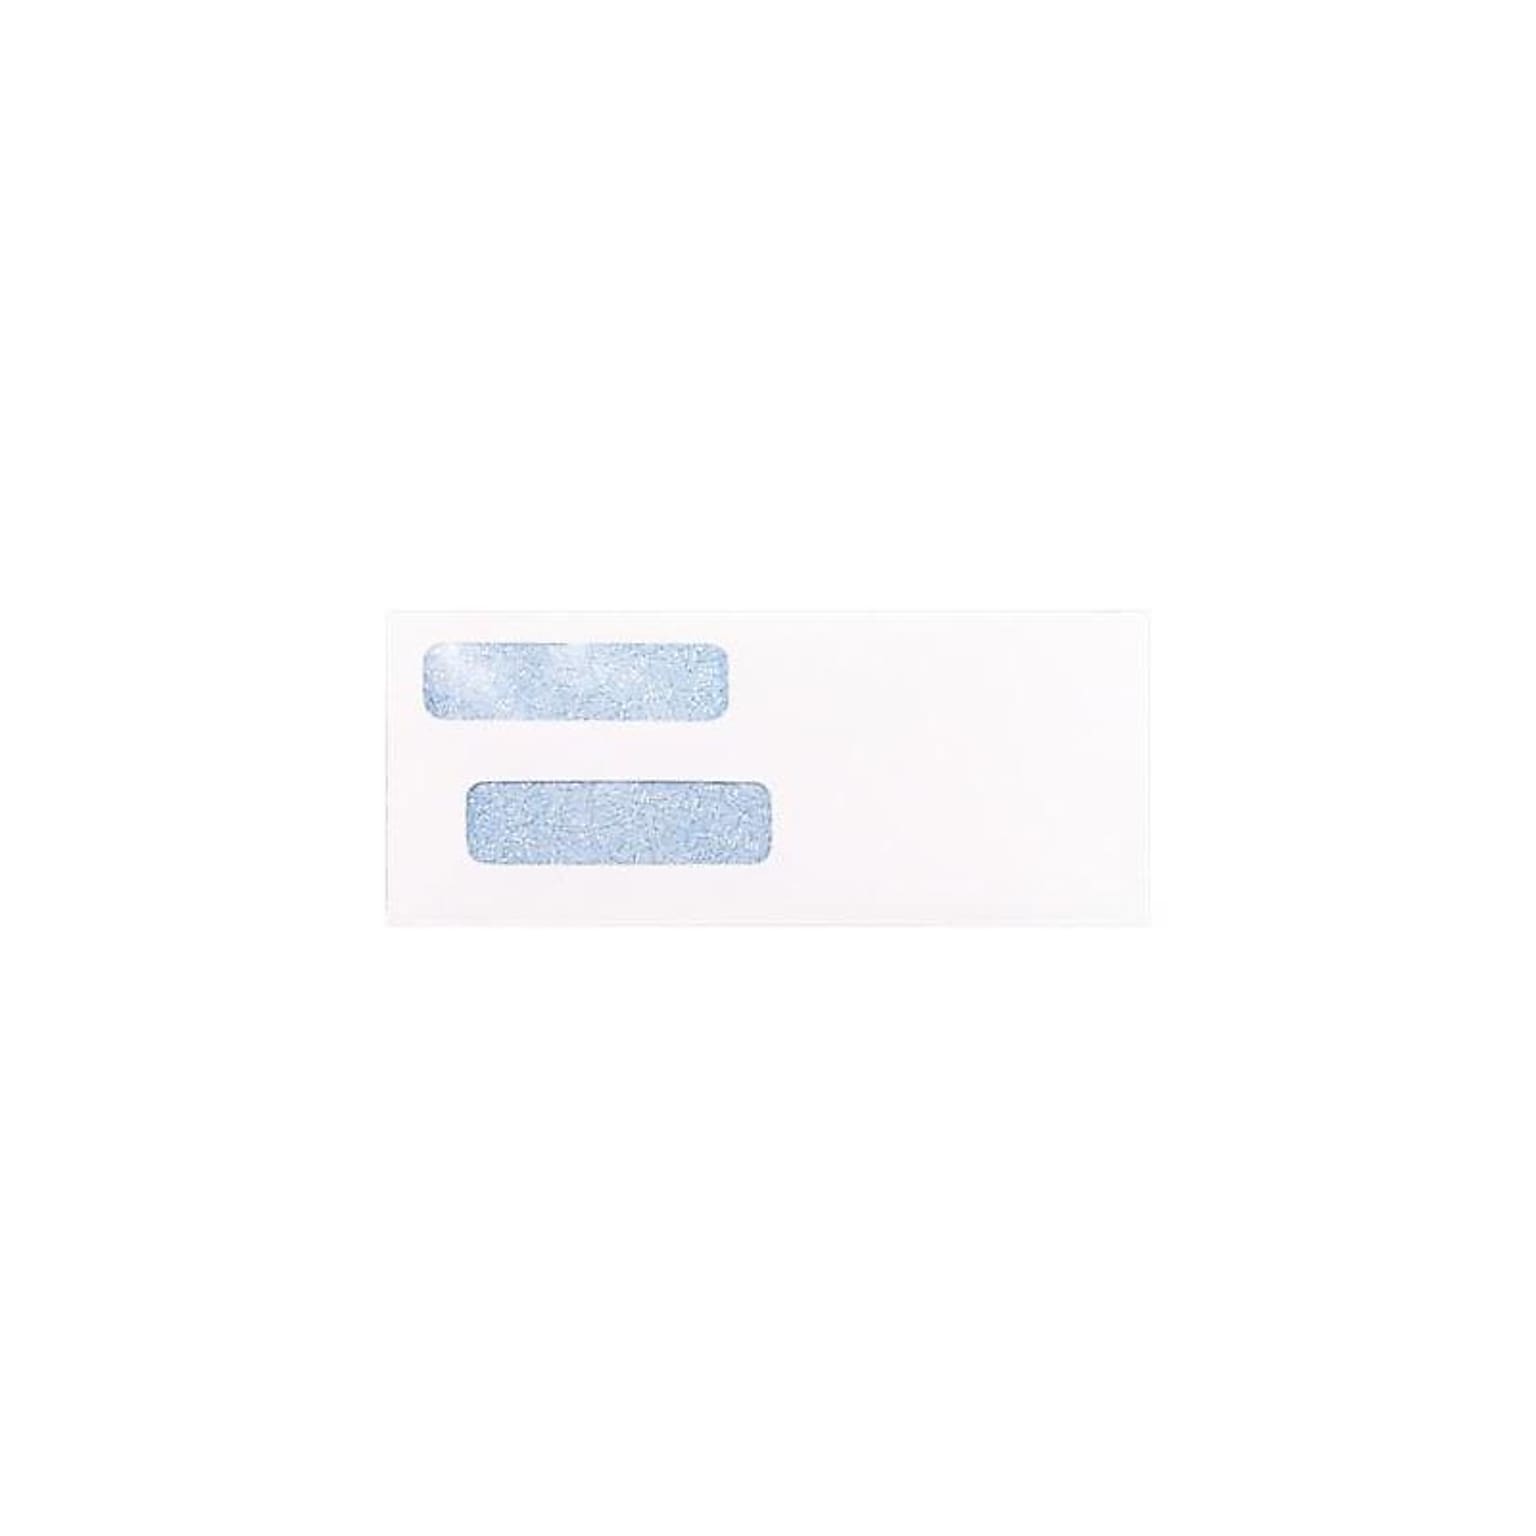 LUX Gummed Security Tinted Business Envelopes, 3 9/16 x 8 3/4, White, 500/Pack (WS-2371-500)